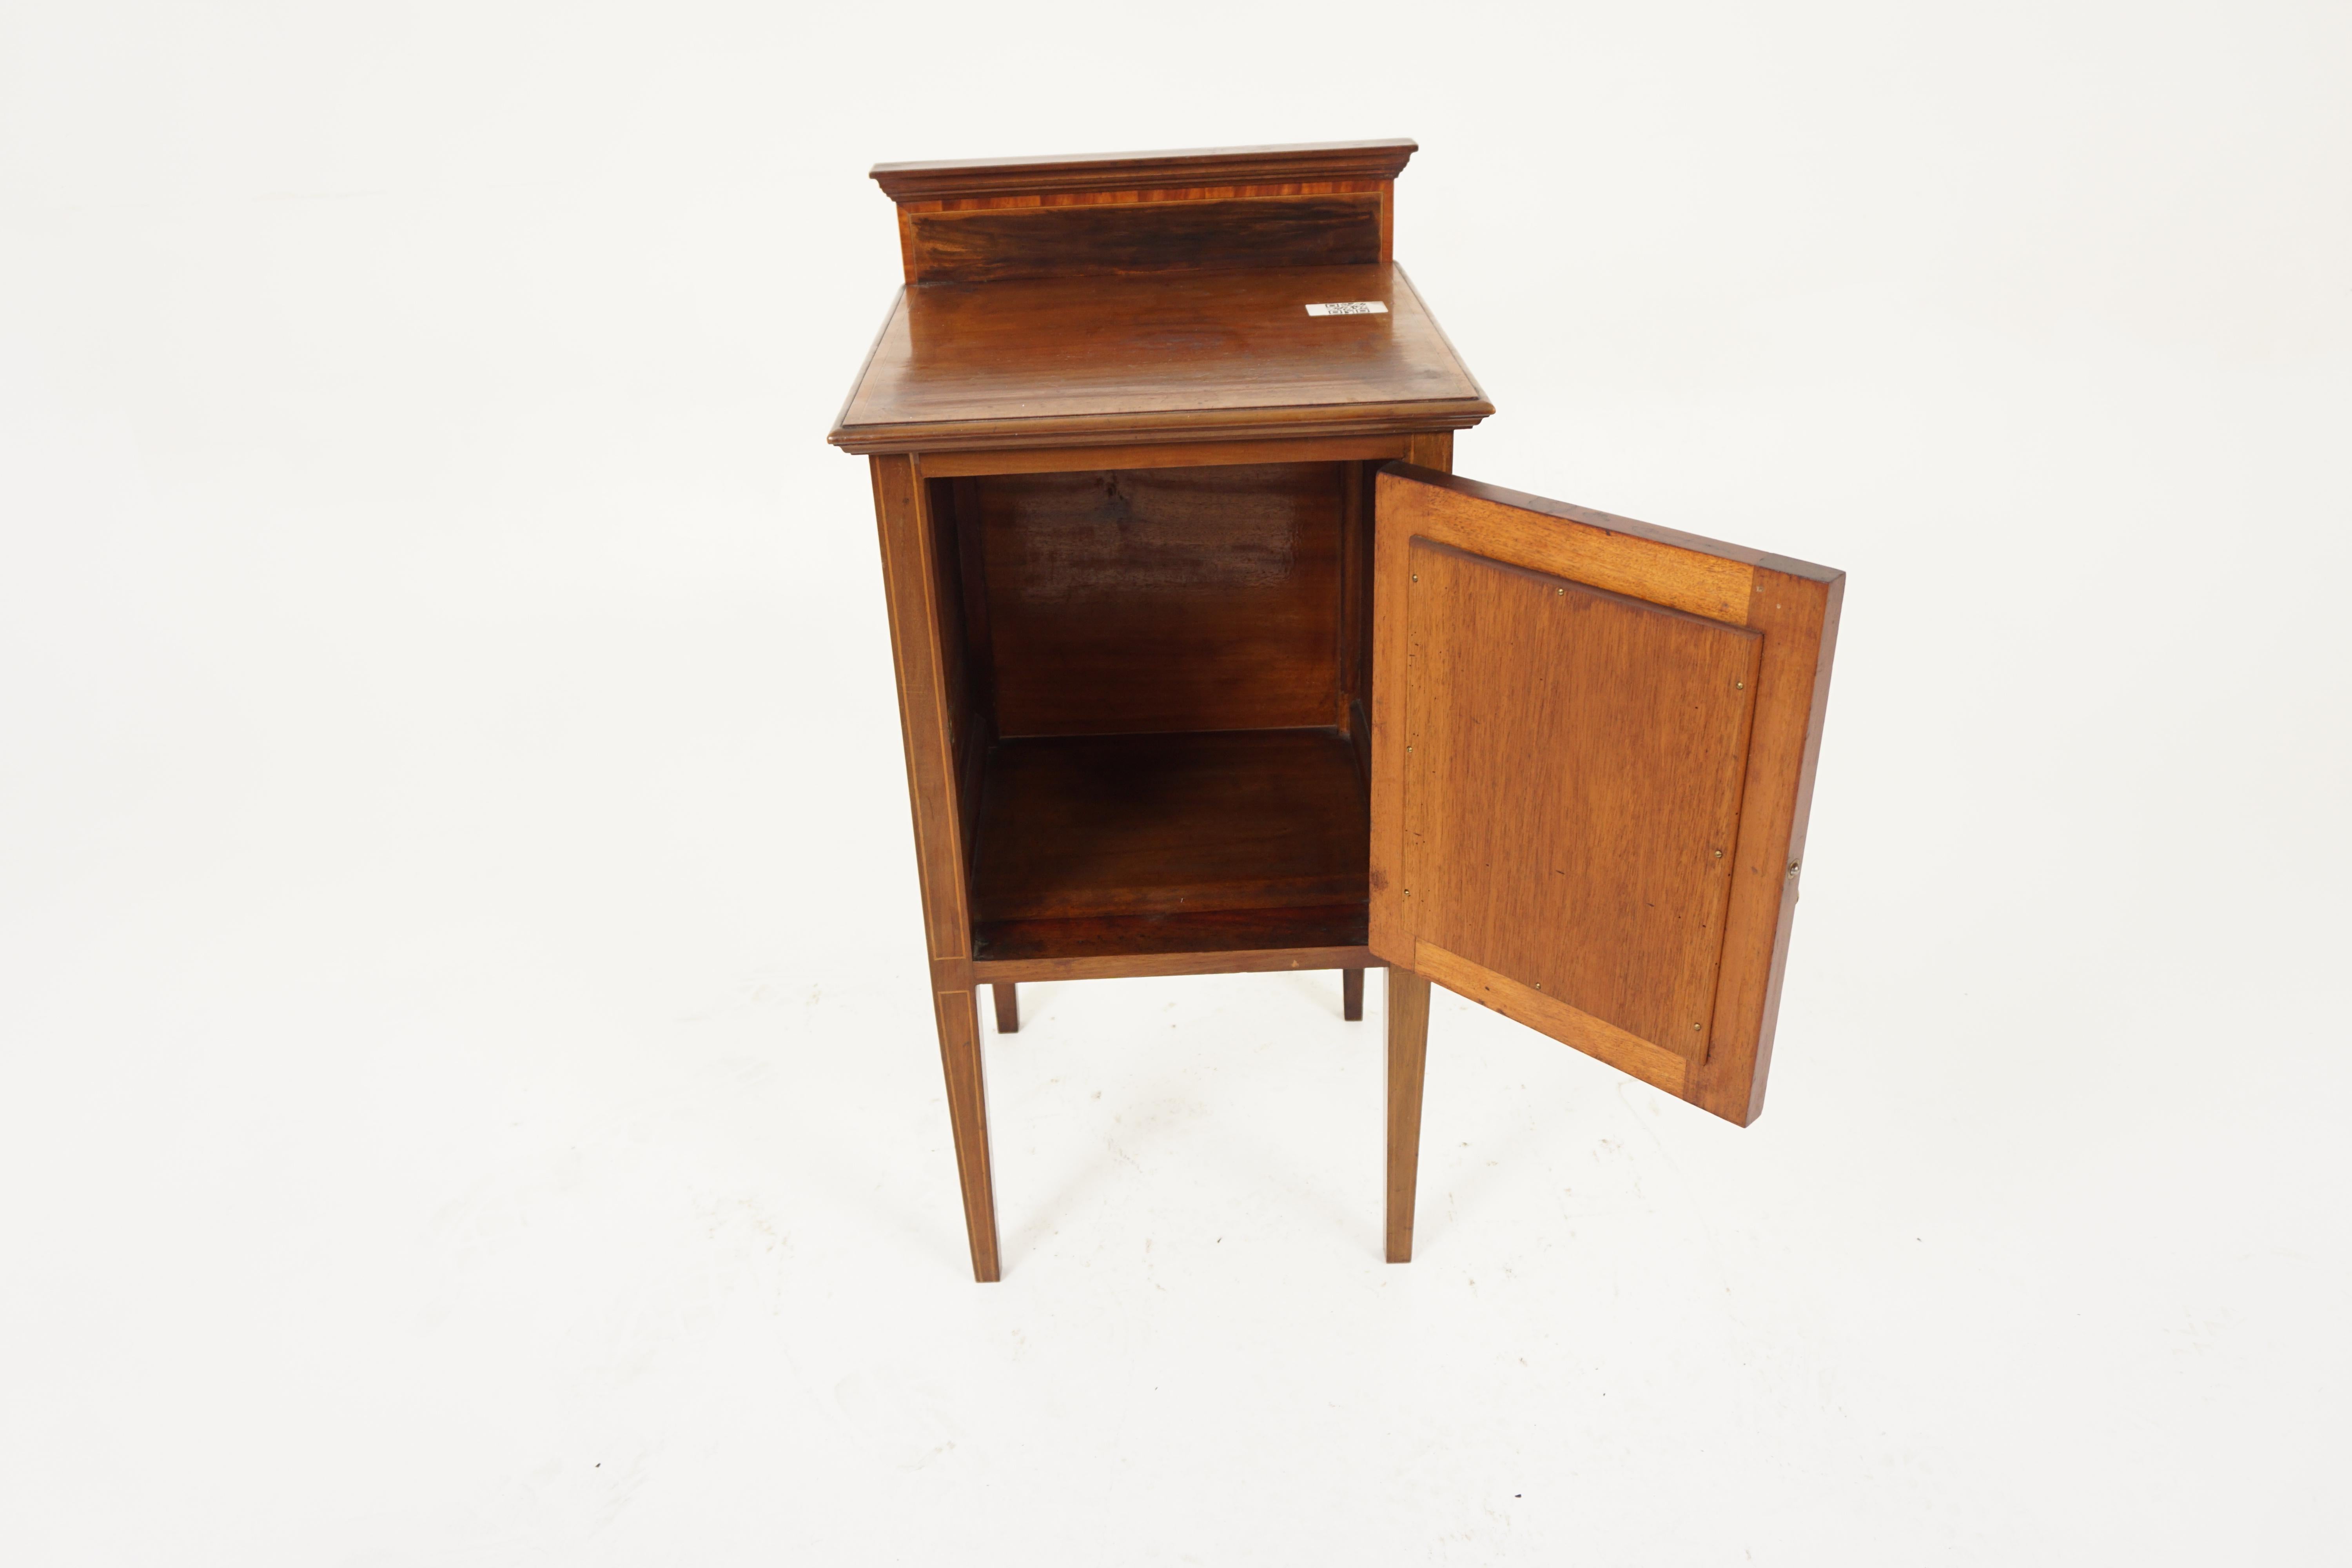 Early 20th Century Antique Inlaid Walnut Nightstand, Sheraton Bedside Table, Scotland 1900, H969 For Sale